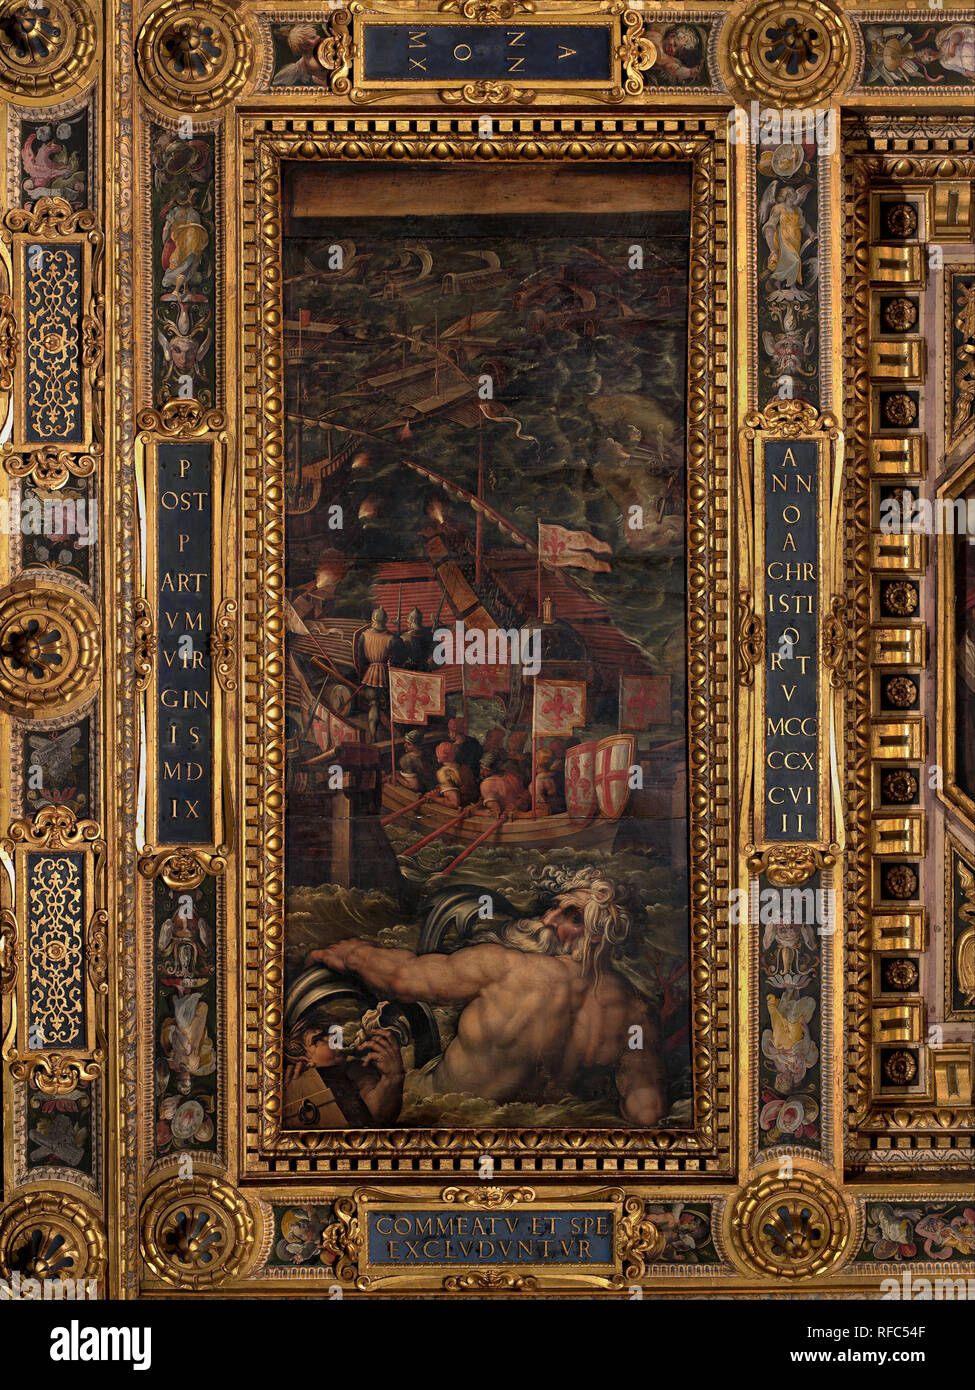 Sea battle between Florentines and Pisans. Date/Period: 1563 - 1565. Oil painting on wood. Height: 540 mm (21.25 in); Width: 250 mm (9.84 in). Author: Giorgio Vasari. VASARI, GIORGIO. Stock Photo